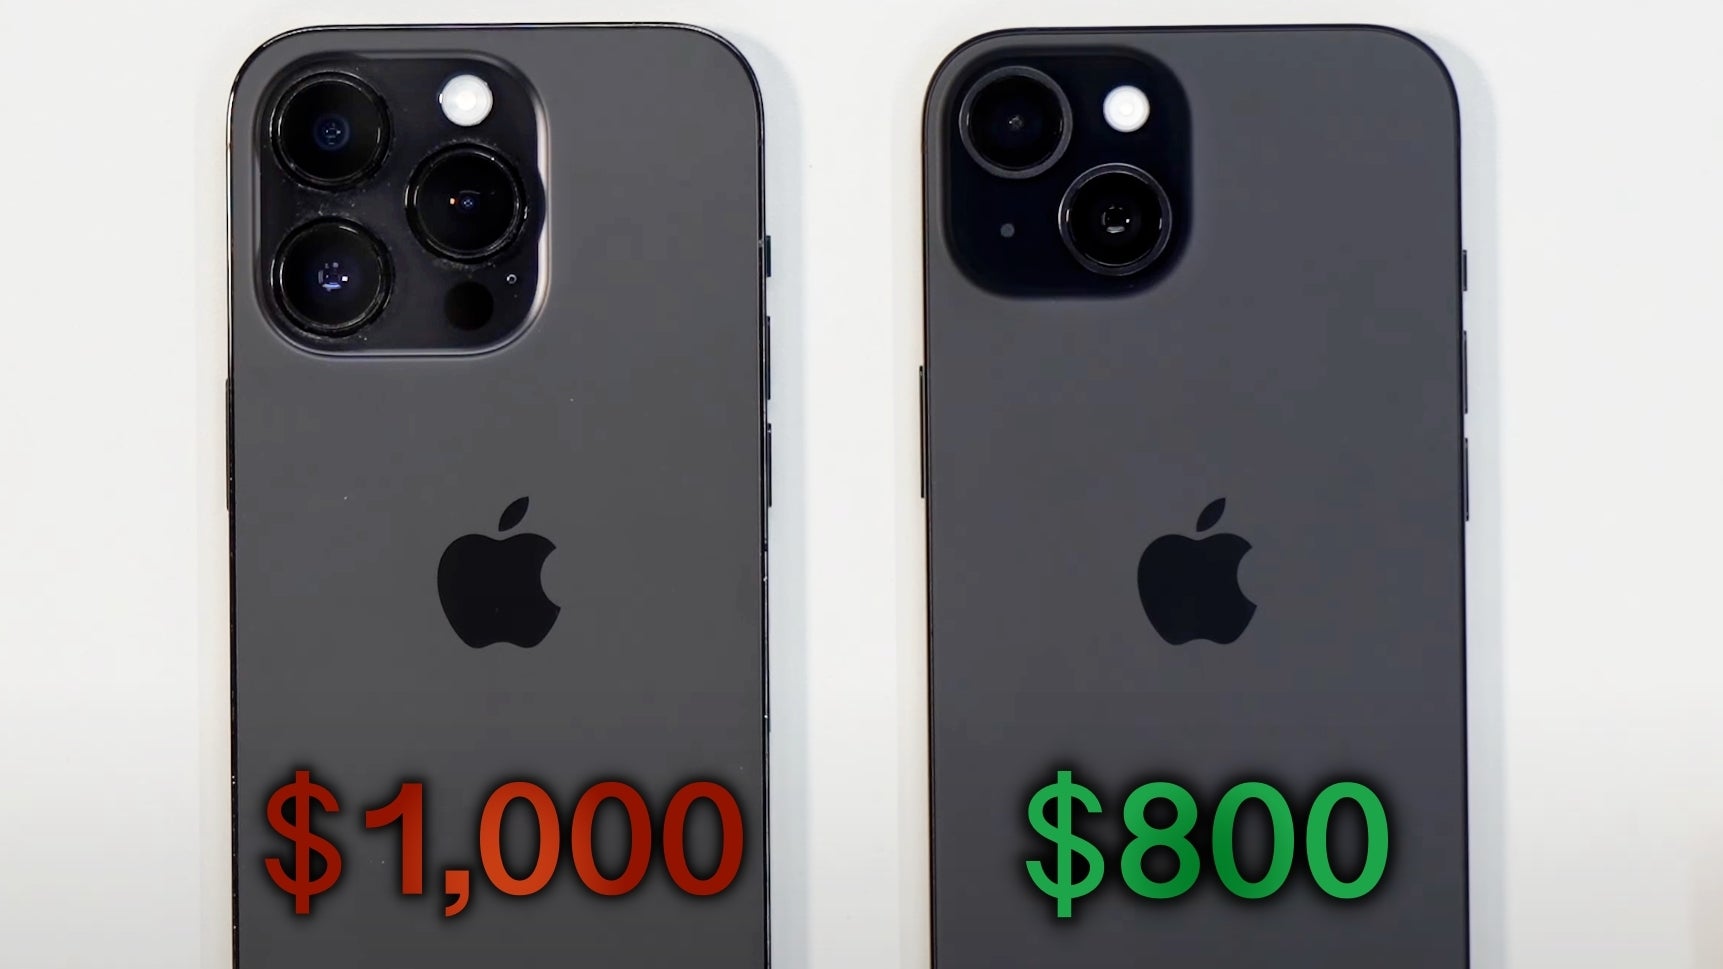 The $800 iPhone 15 is this year&#039;s surprise Semi-Pro iPhone we didn&#039;t even know we needed.  - $800 iPhone 15 seems too good to be real: Apple can be super generous when the bar is set low